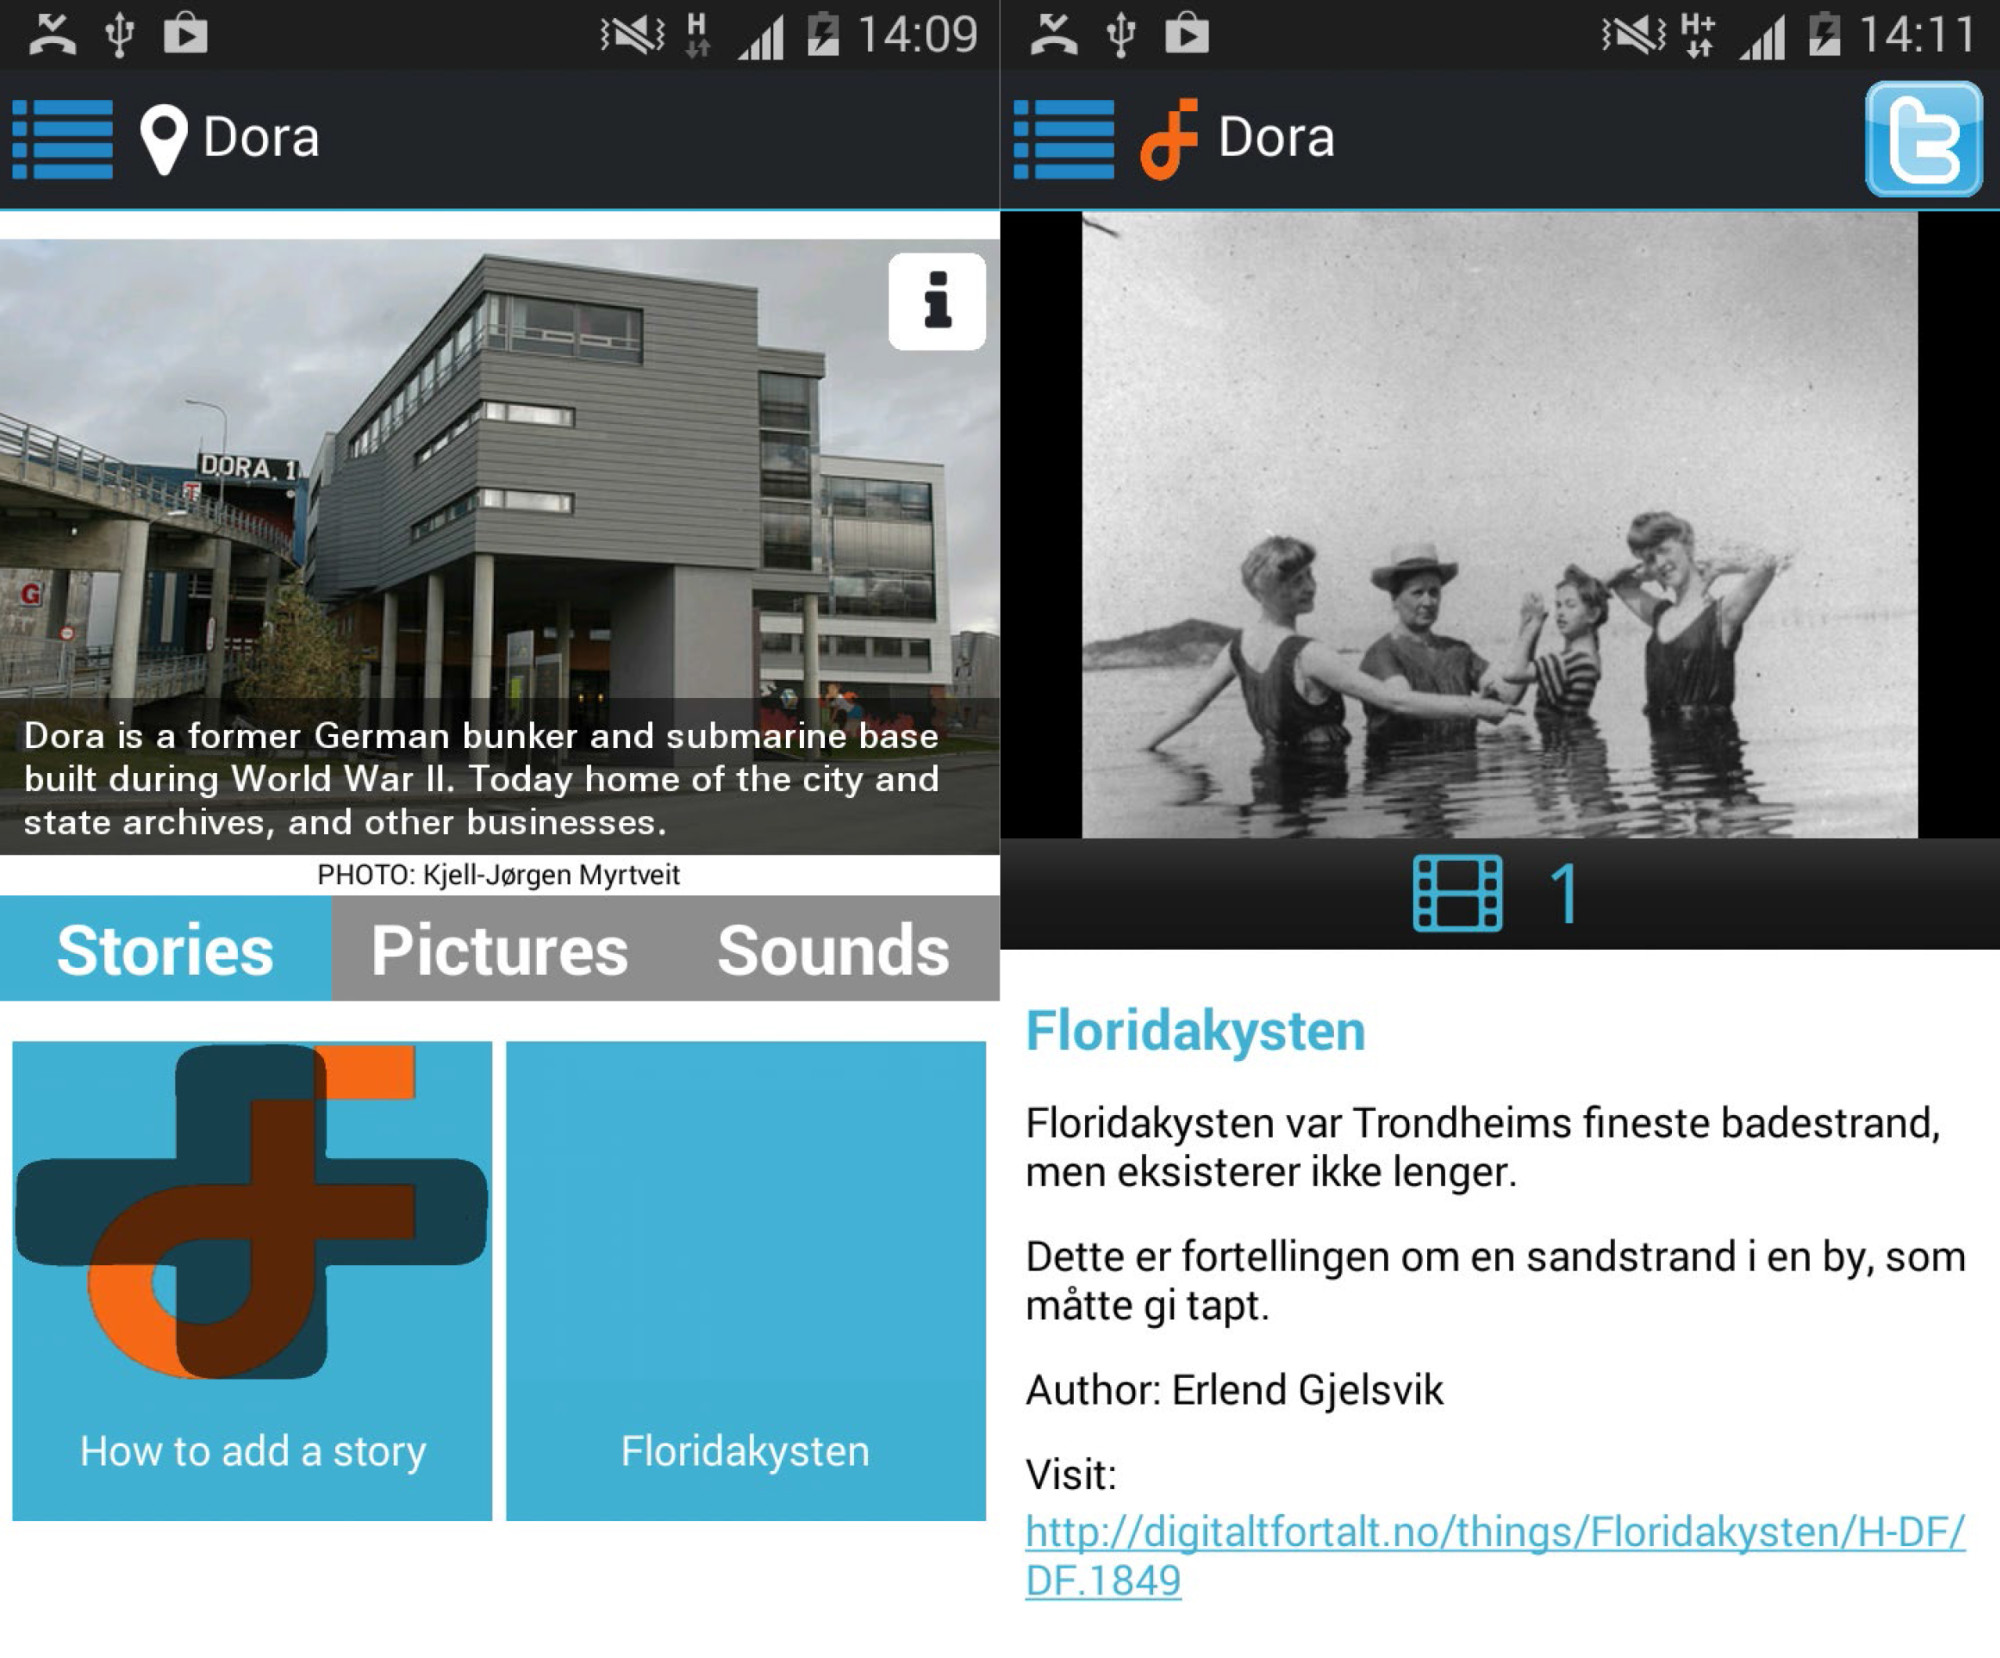 This is what the app looks like. Behind the photo of the wartime bunker Dora is the story of a lost sandy beach that people used to call 'Floridakysten' (the Florida coast).